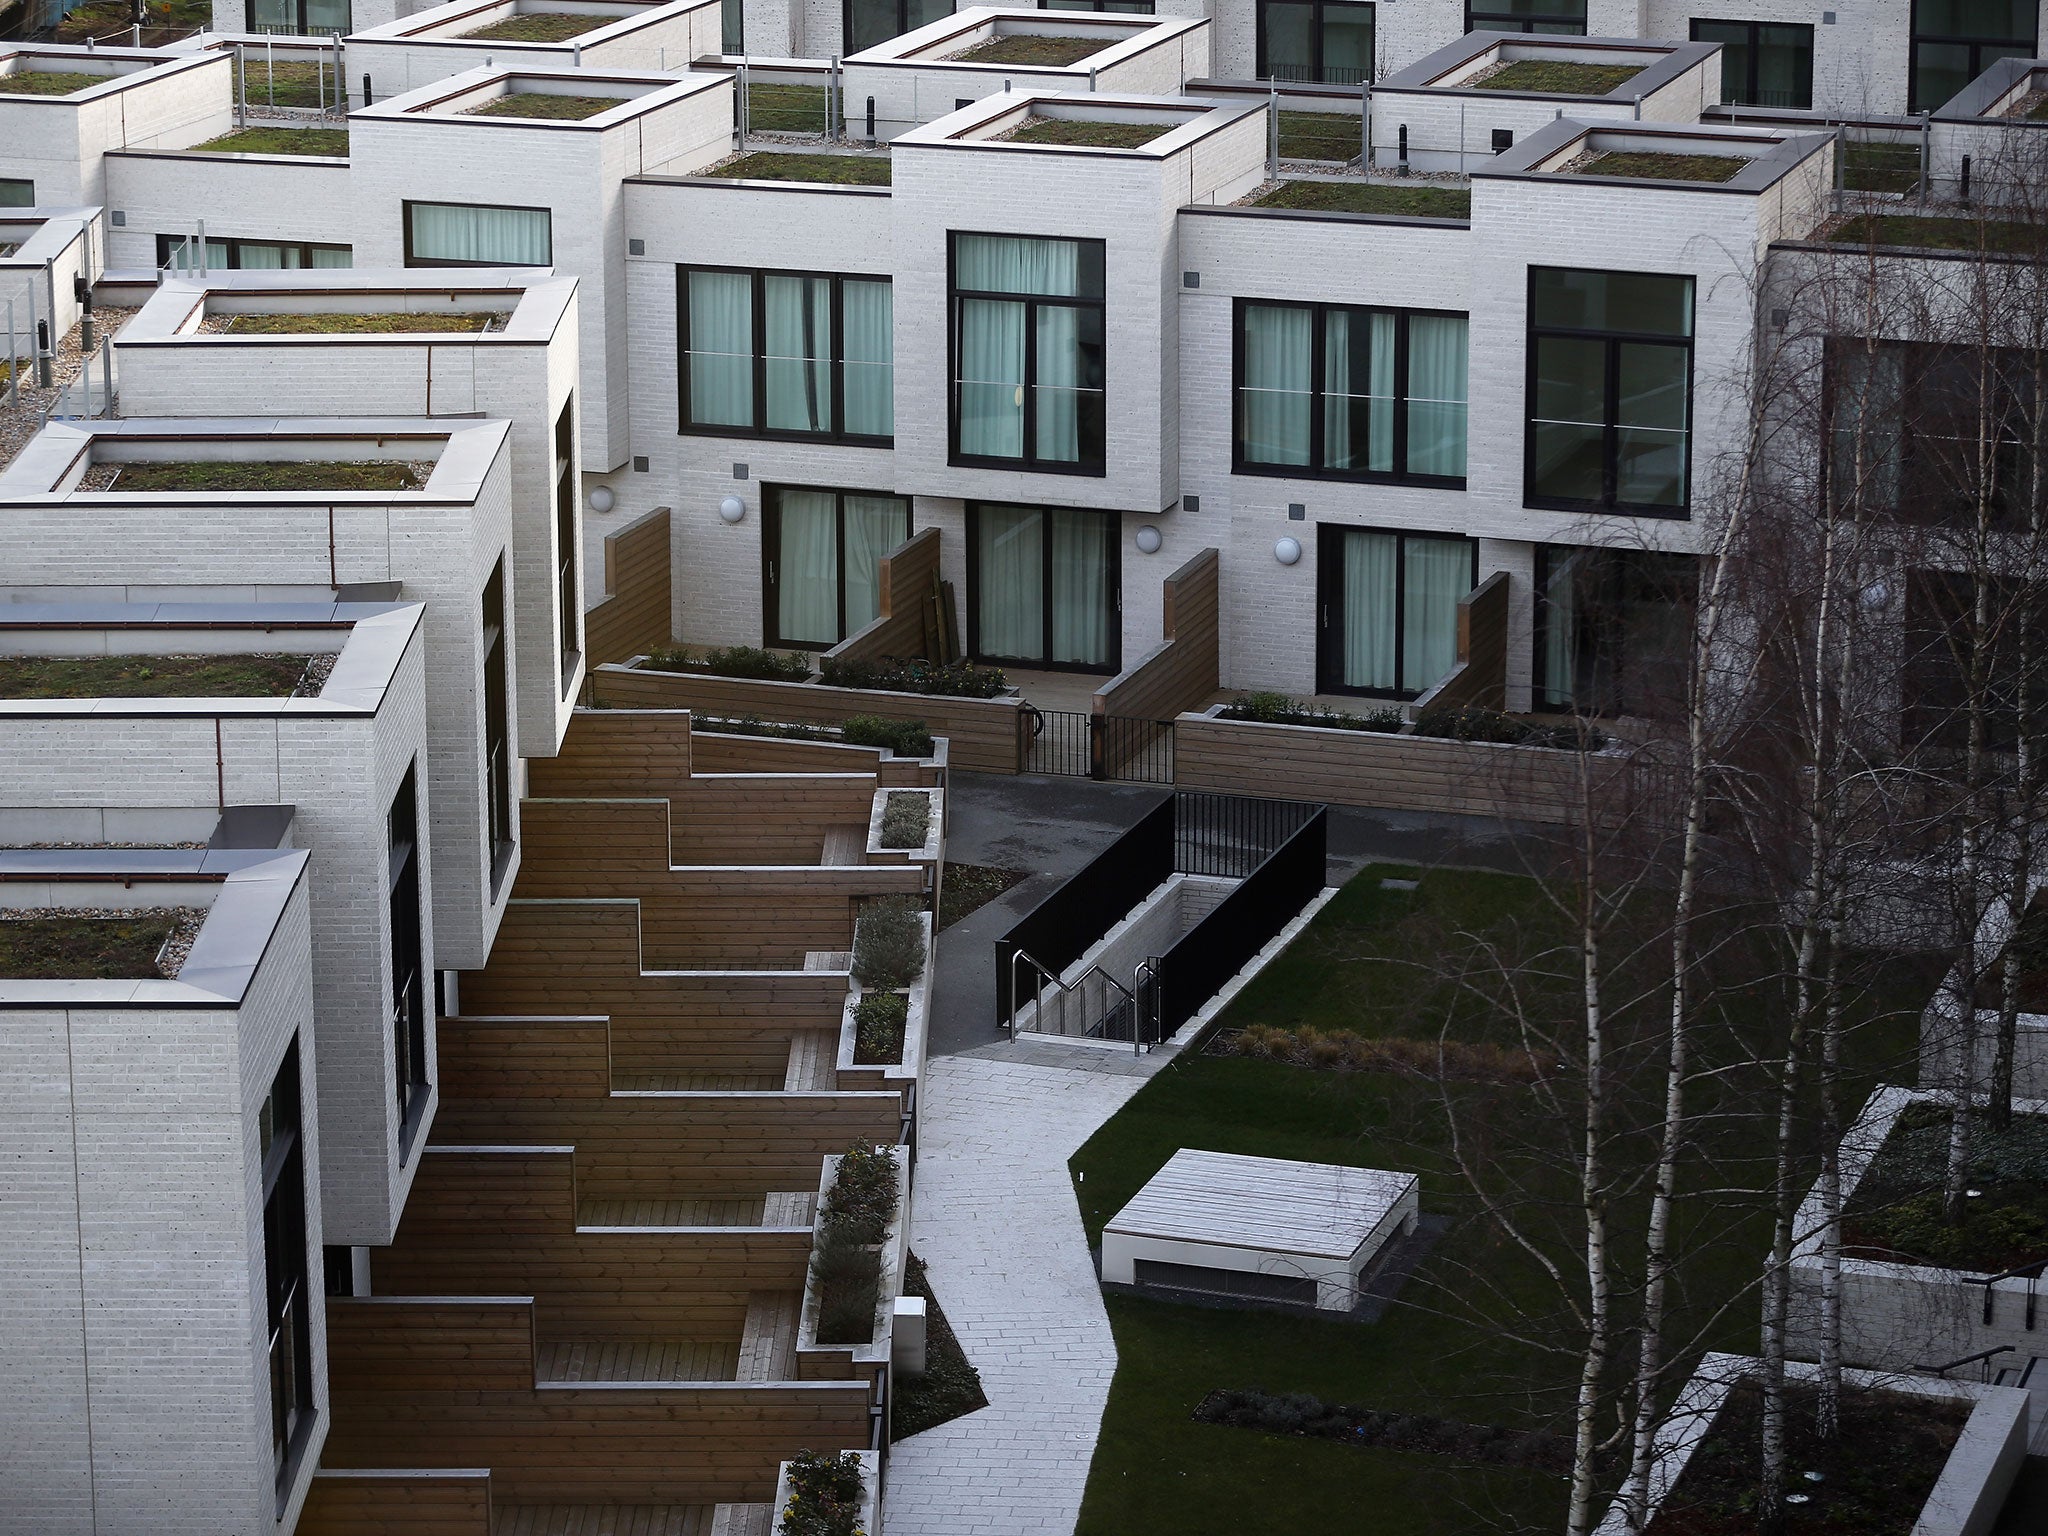 A general view of apartments at the newly transformed 'East Village' near the Olympic Stadium on March 5, 2014 in London, England.